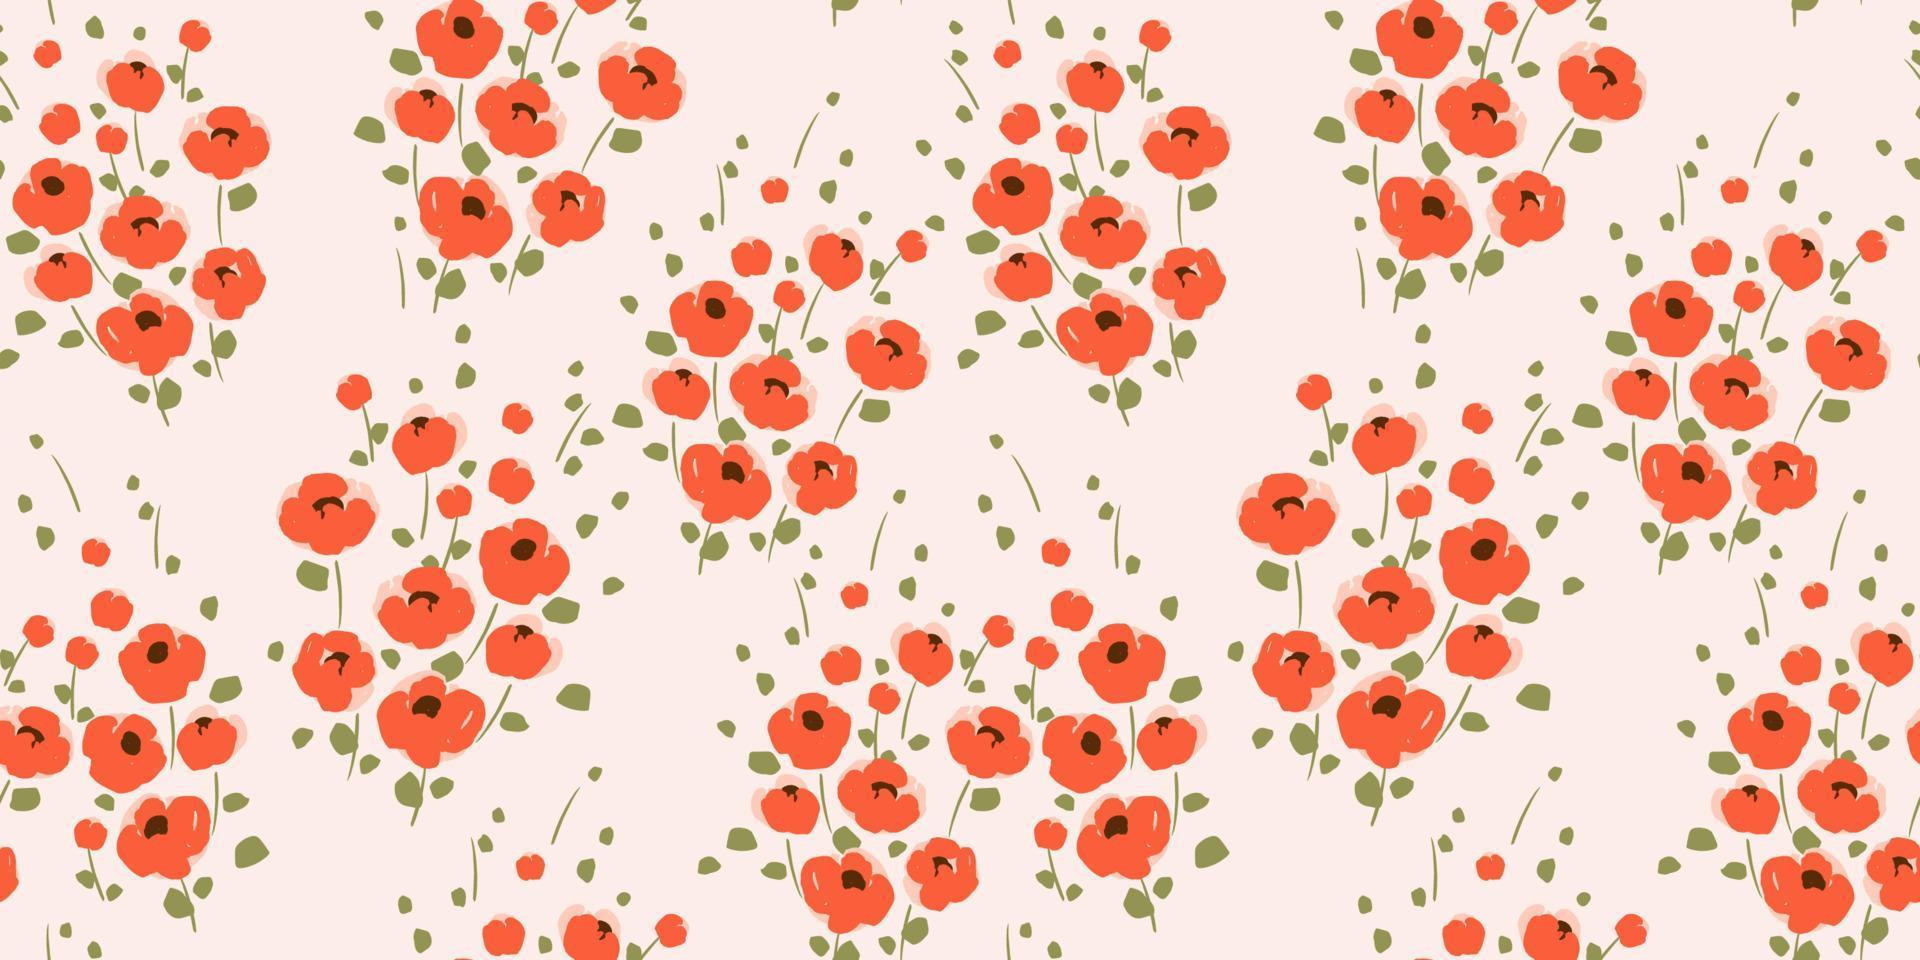 Floral seamless pattern. Vector design for paper, cover, fabric, interior decor and other use